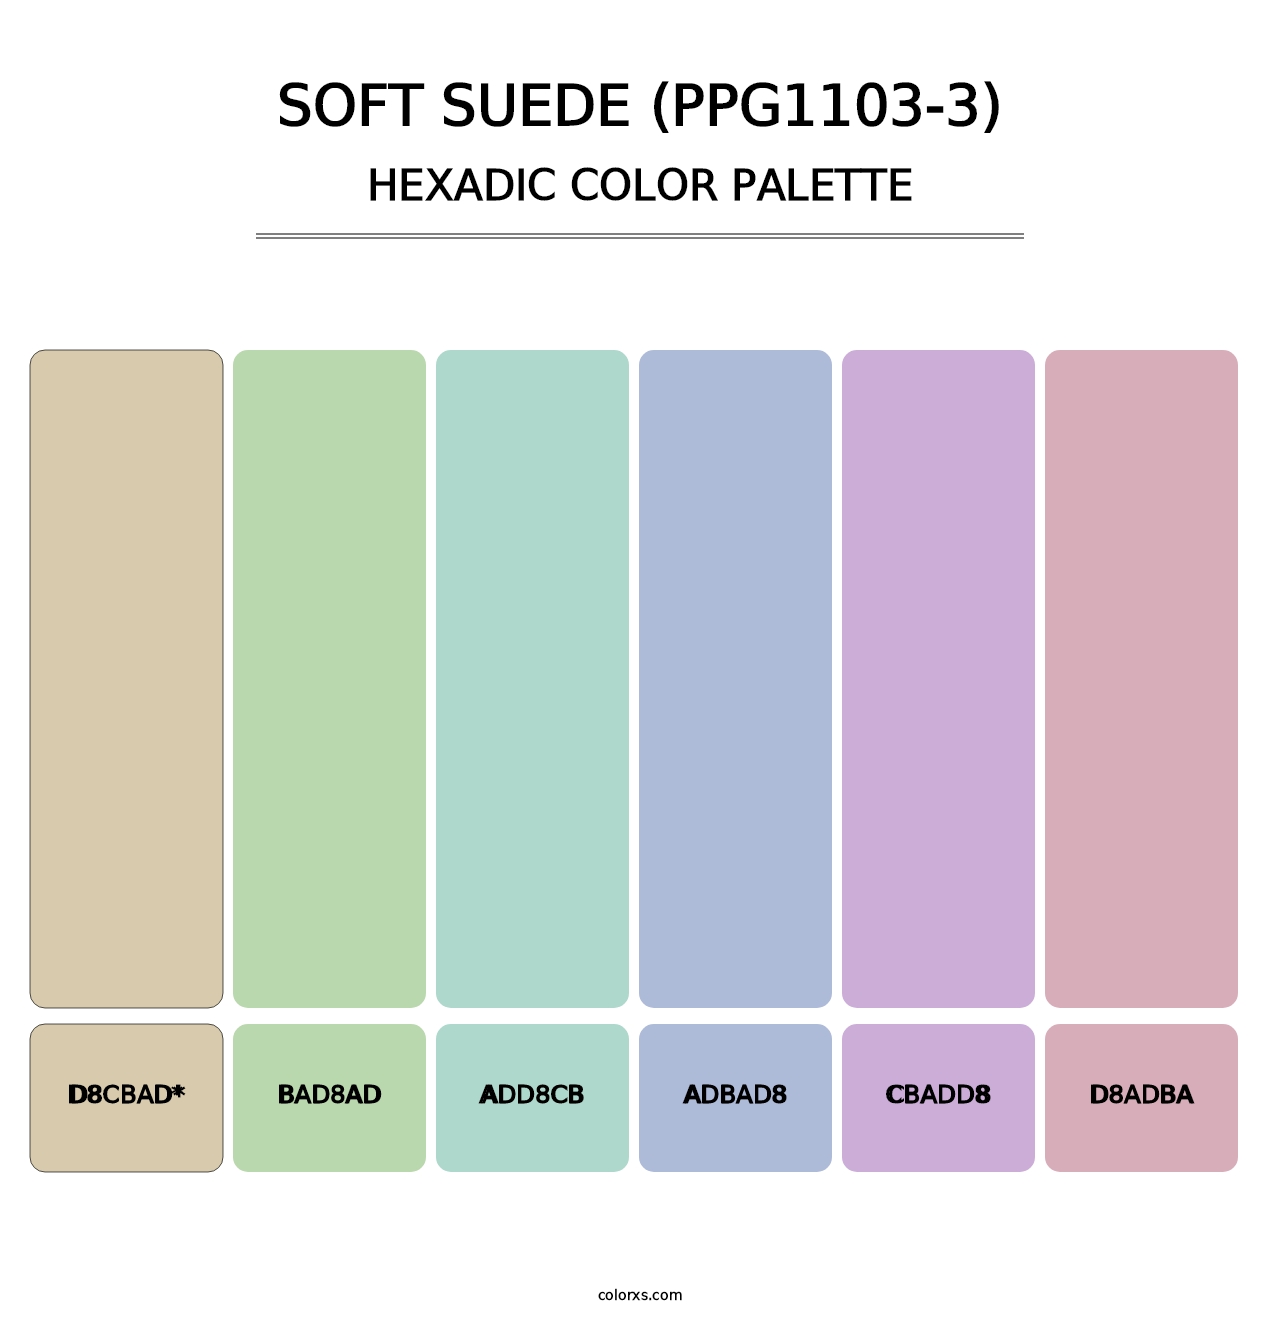 Soft Suede (PPG1103-3) - Hexadic Color Palette